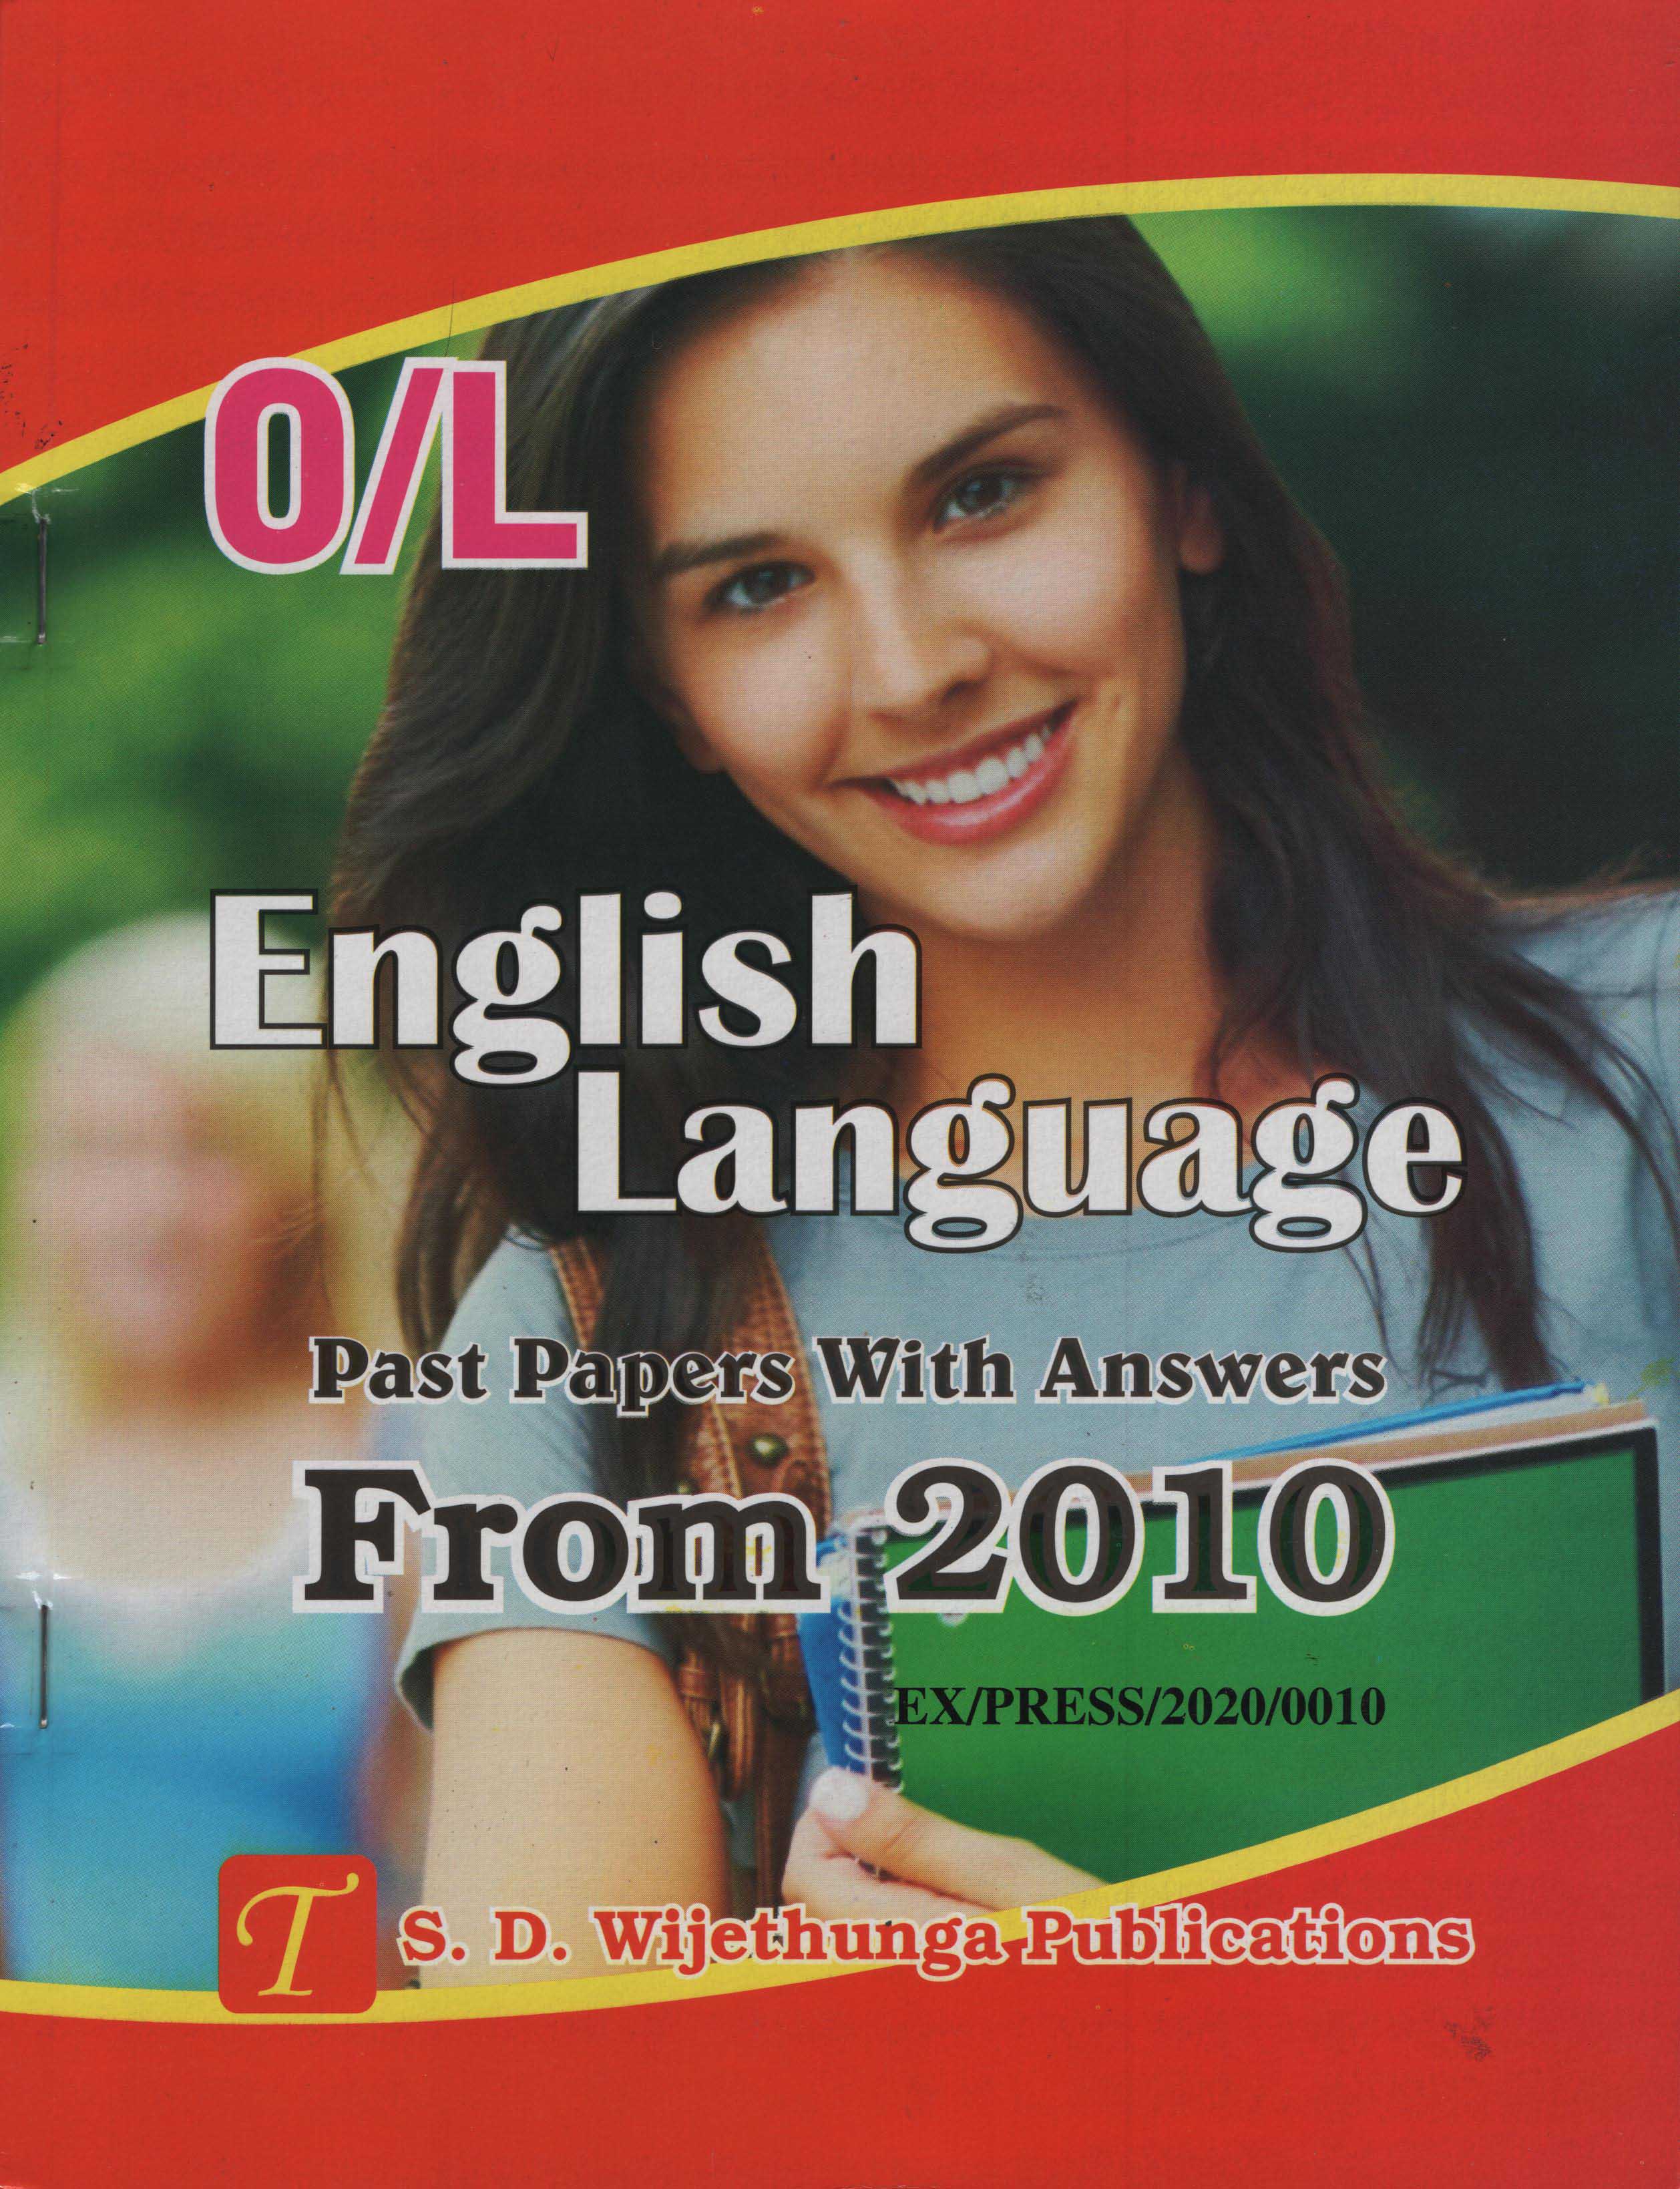 O/L English Language Past Papers With Answers From 2010